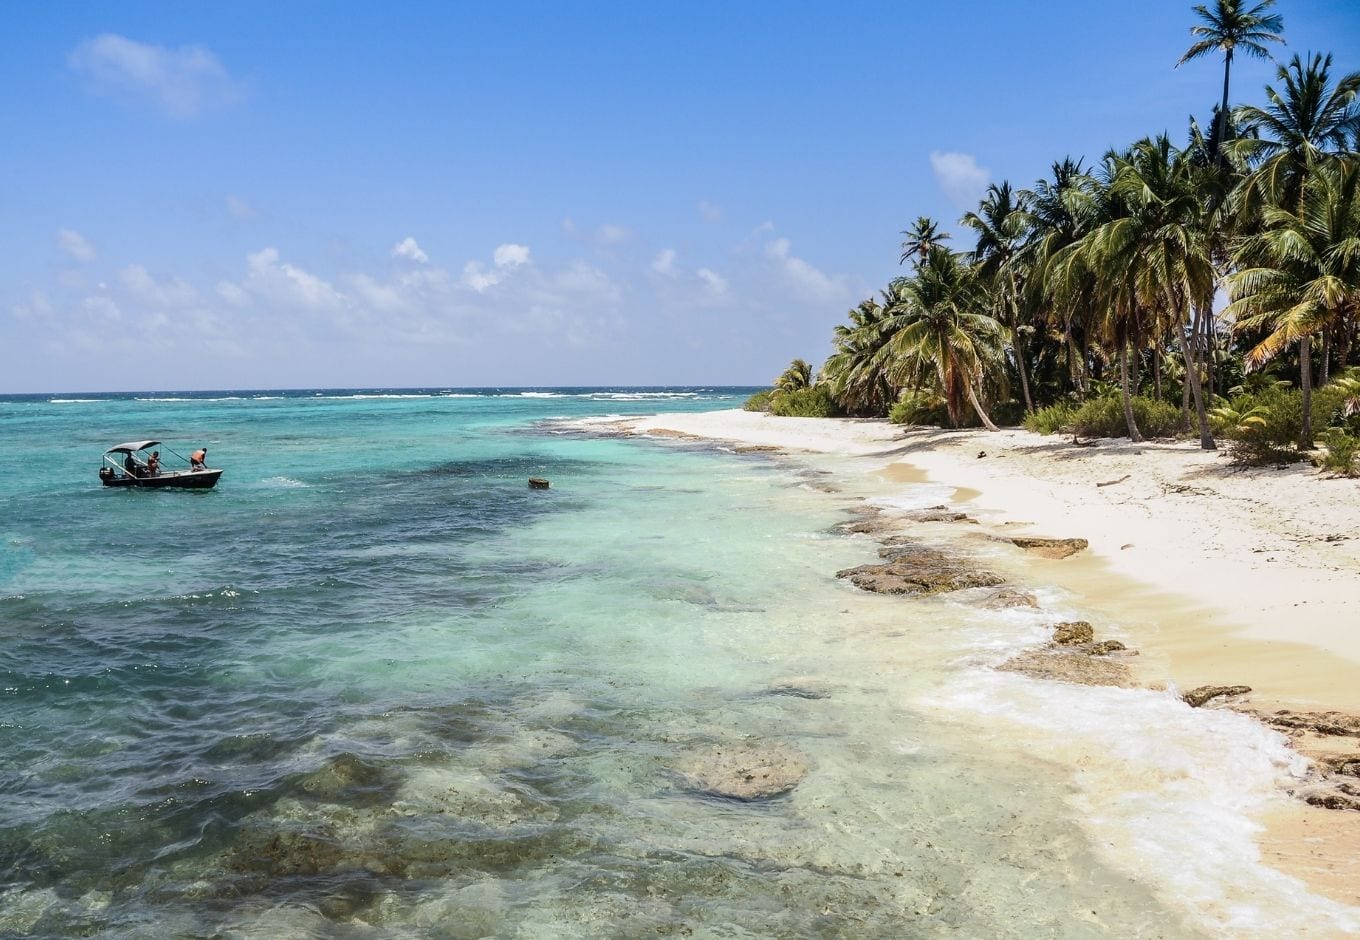 White sandy beach with palm trees and transparent blue-green water at San Andrés, in Colombia, South America.